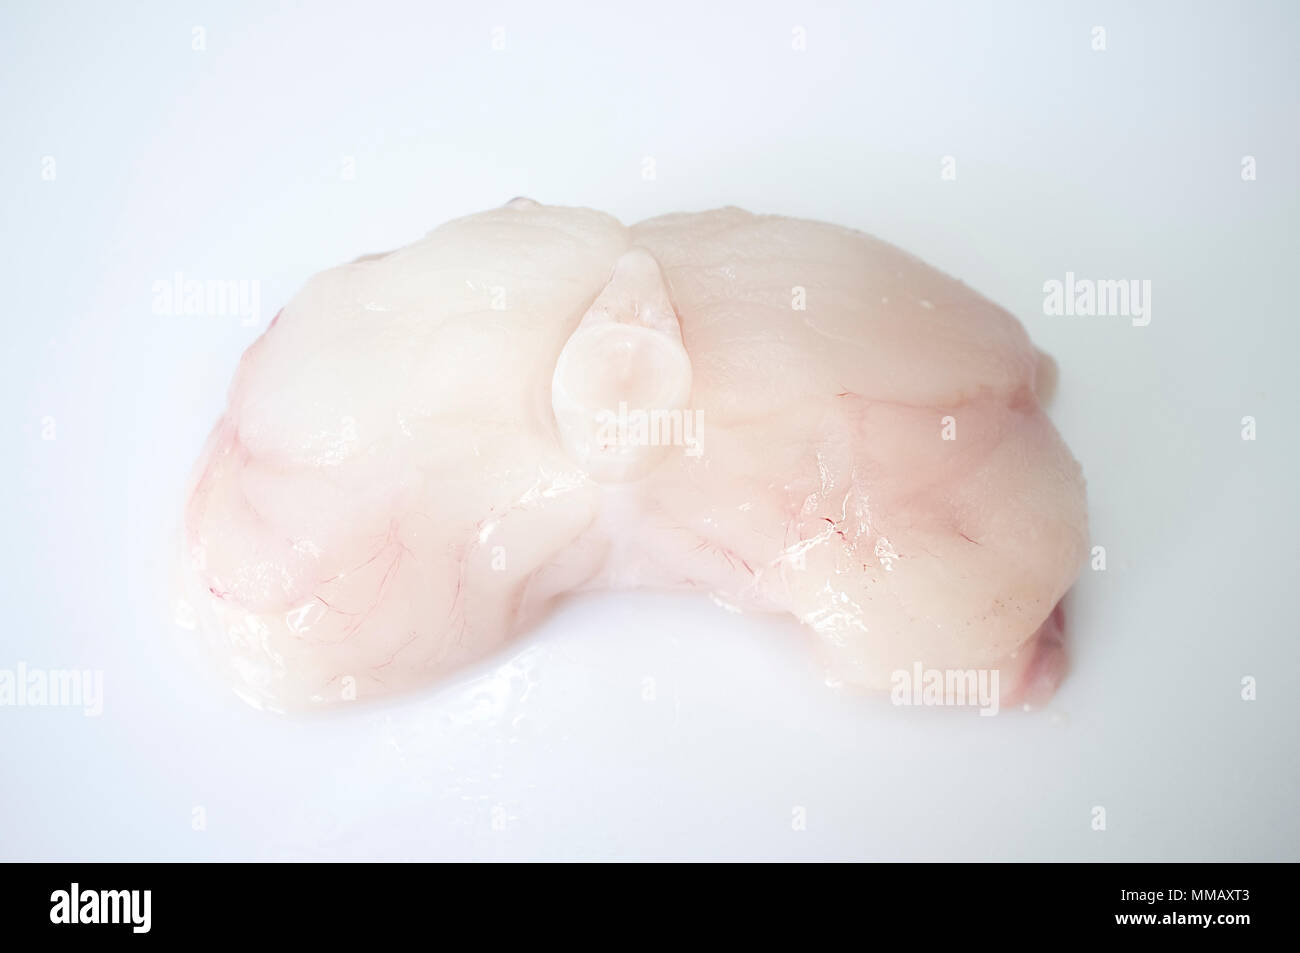 Monkfish tail steak. Isolated over white background. Isolated over white background Stock Photo